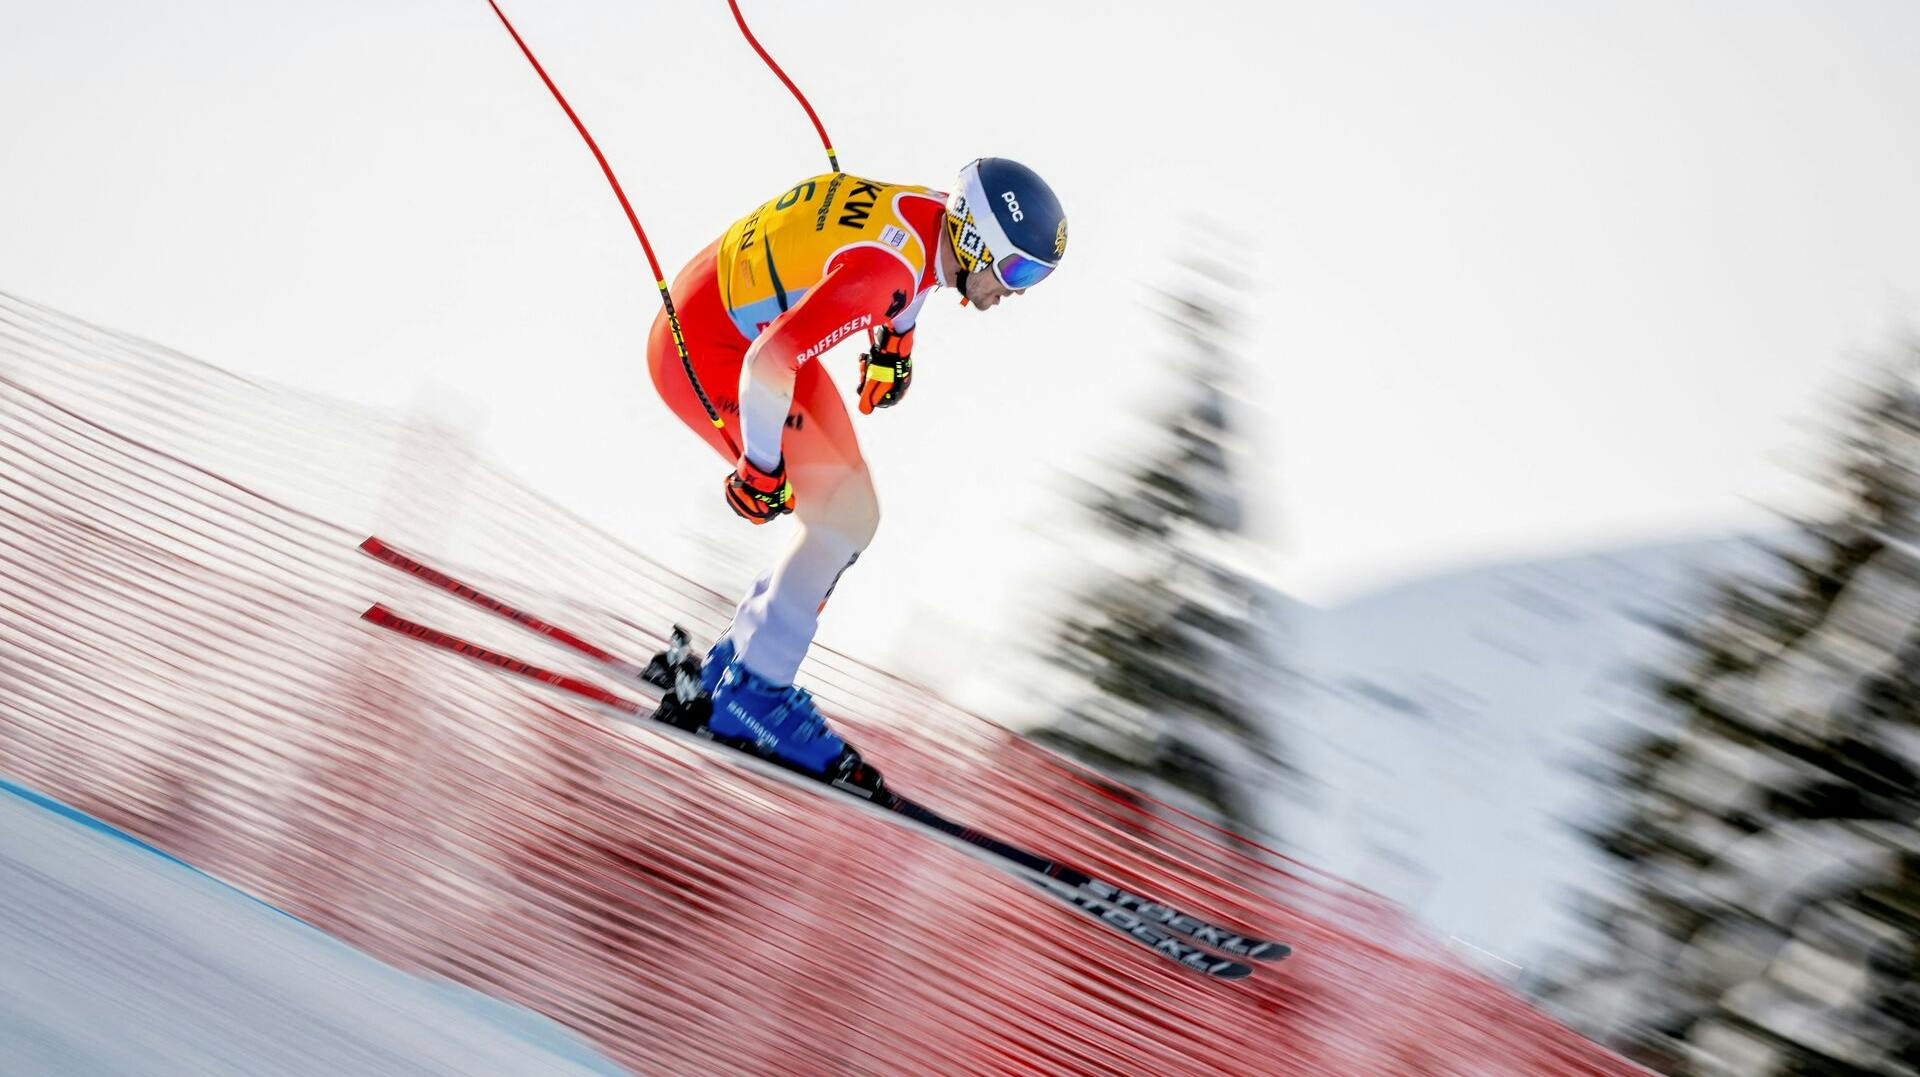 Switzerland's Marco Kohler takes part in the Men's Downhill training session of the FIS Alpine Ski World Cup in Wengen, on January 10, 2024. (Photo by Fabrice COFFRINI / AFP)